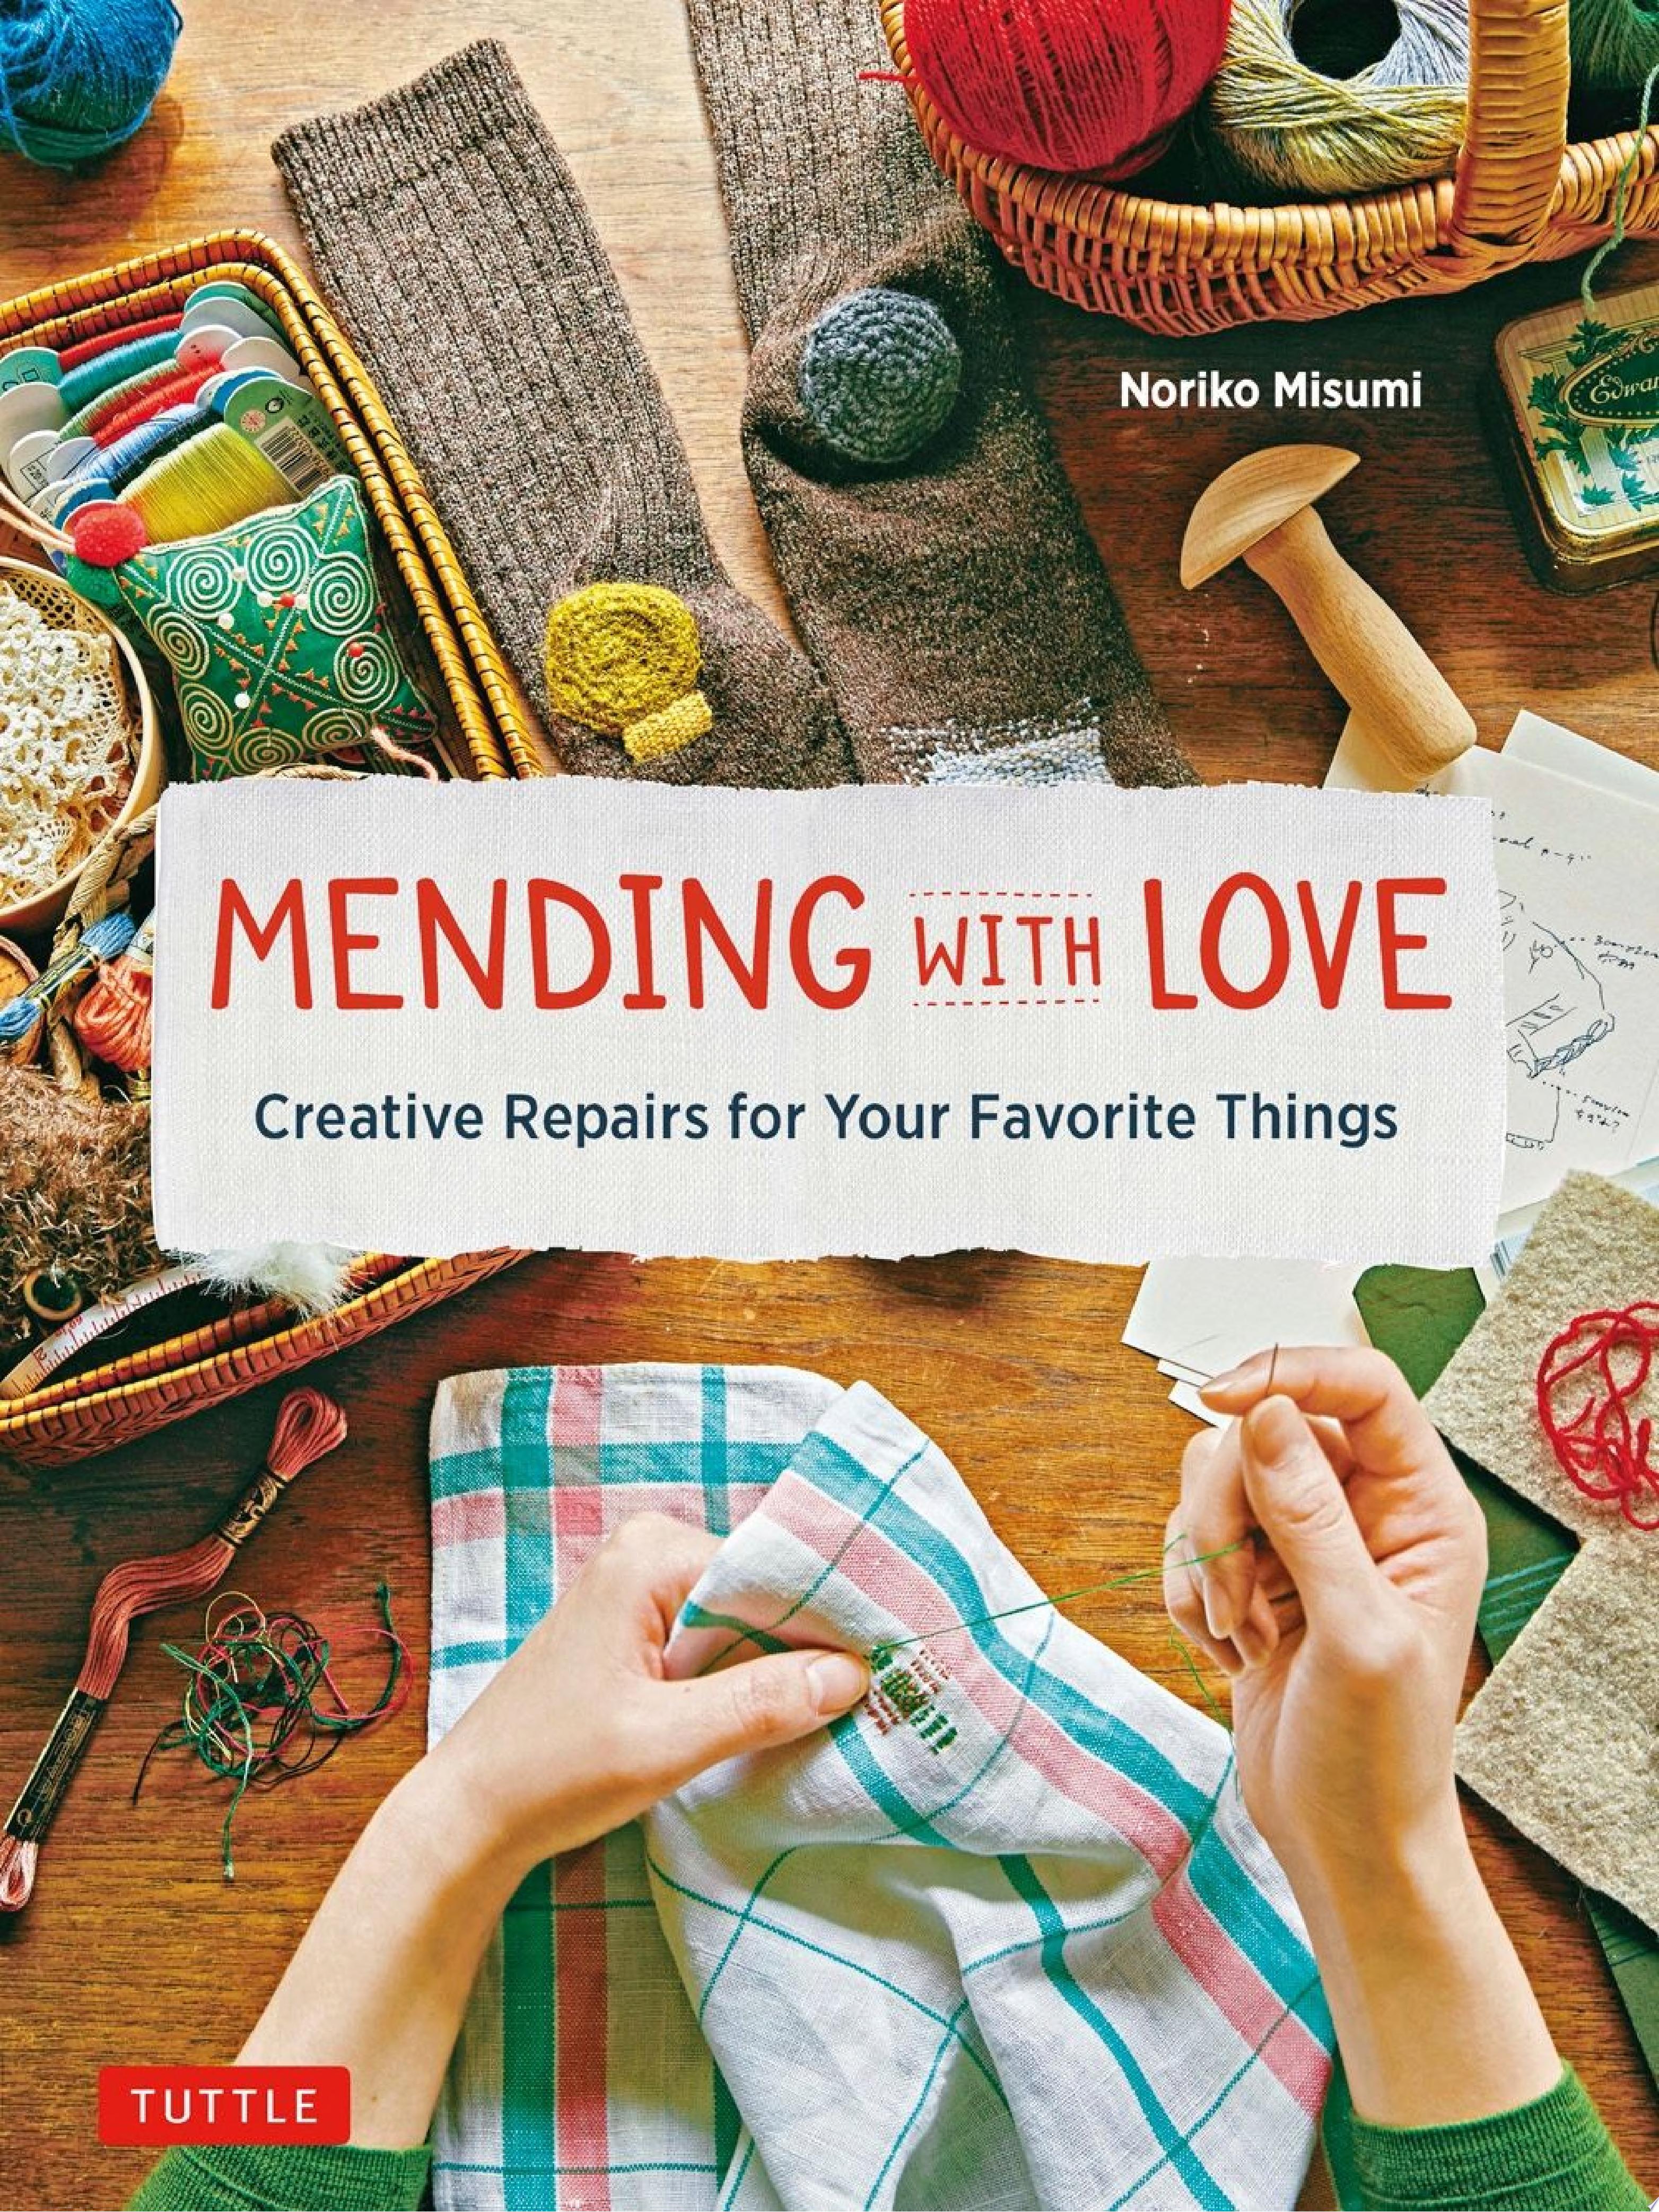 Image for "Mending with Love"